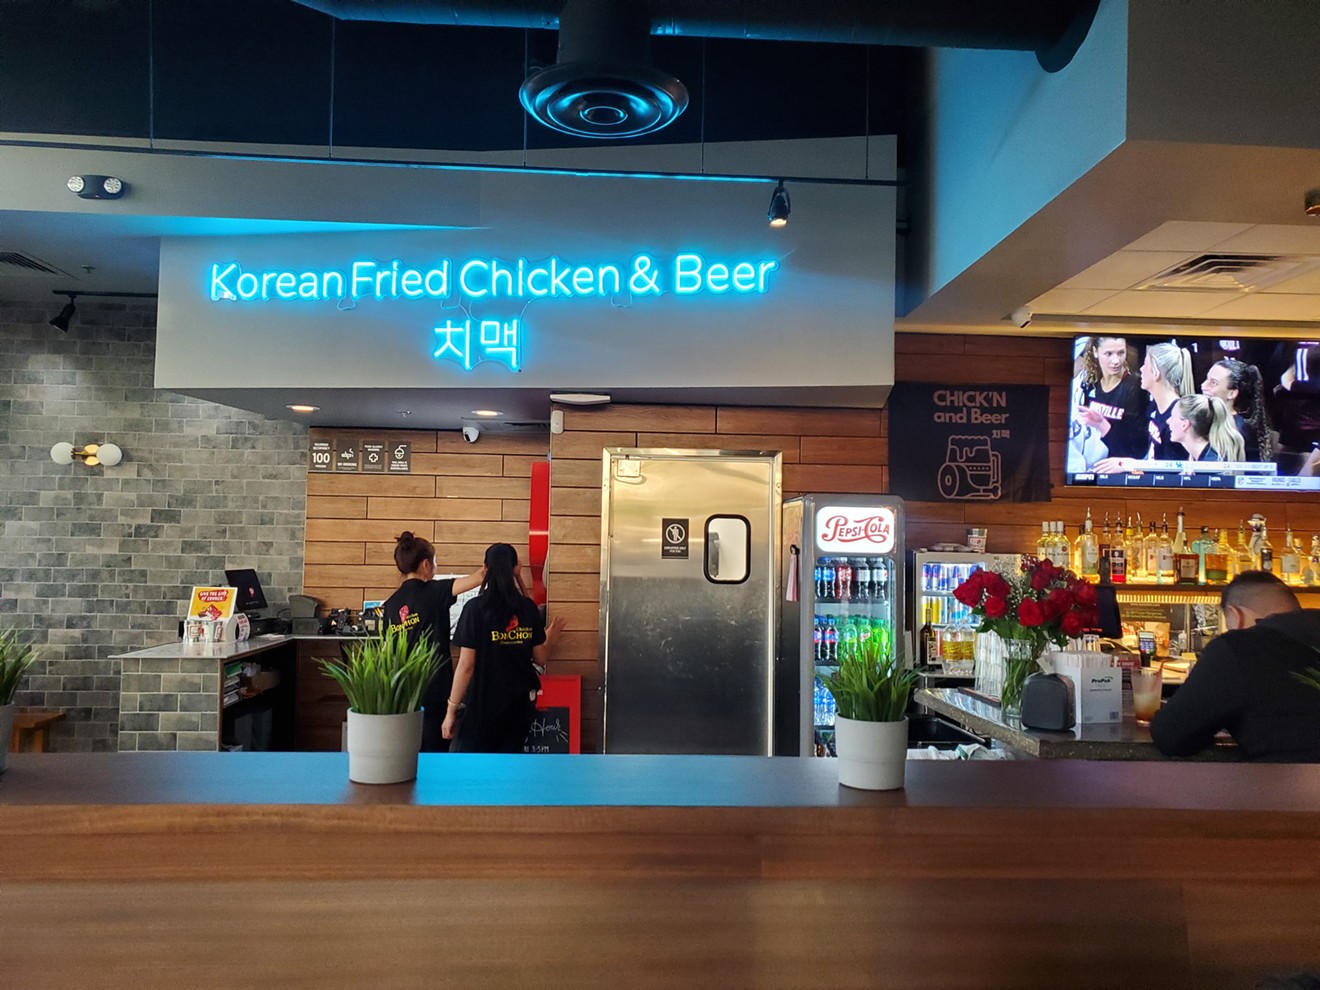 Korean fried chicken is the latest food trend to dominate in Denver.